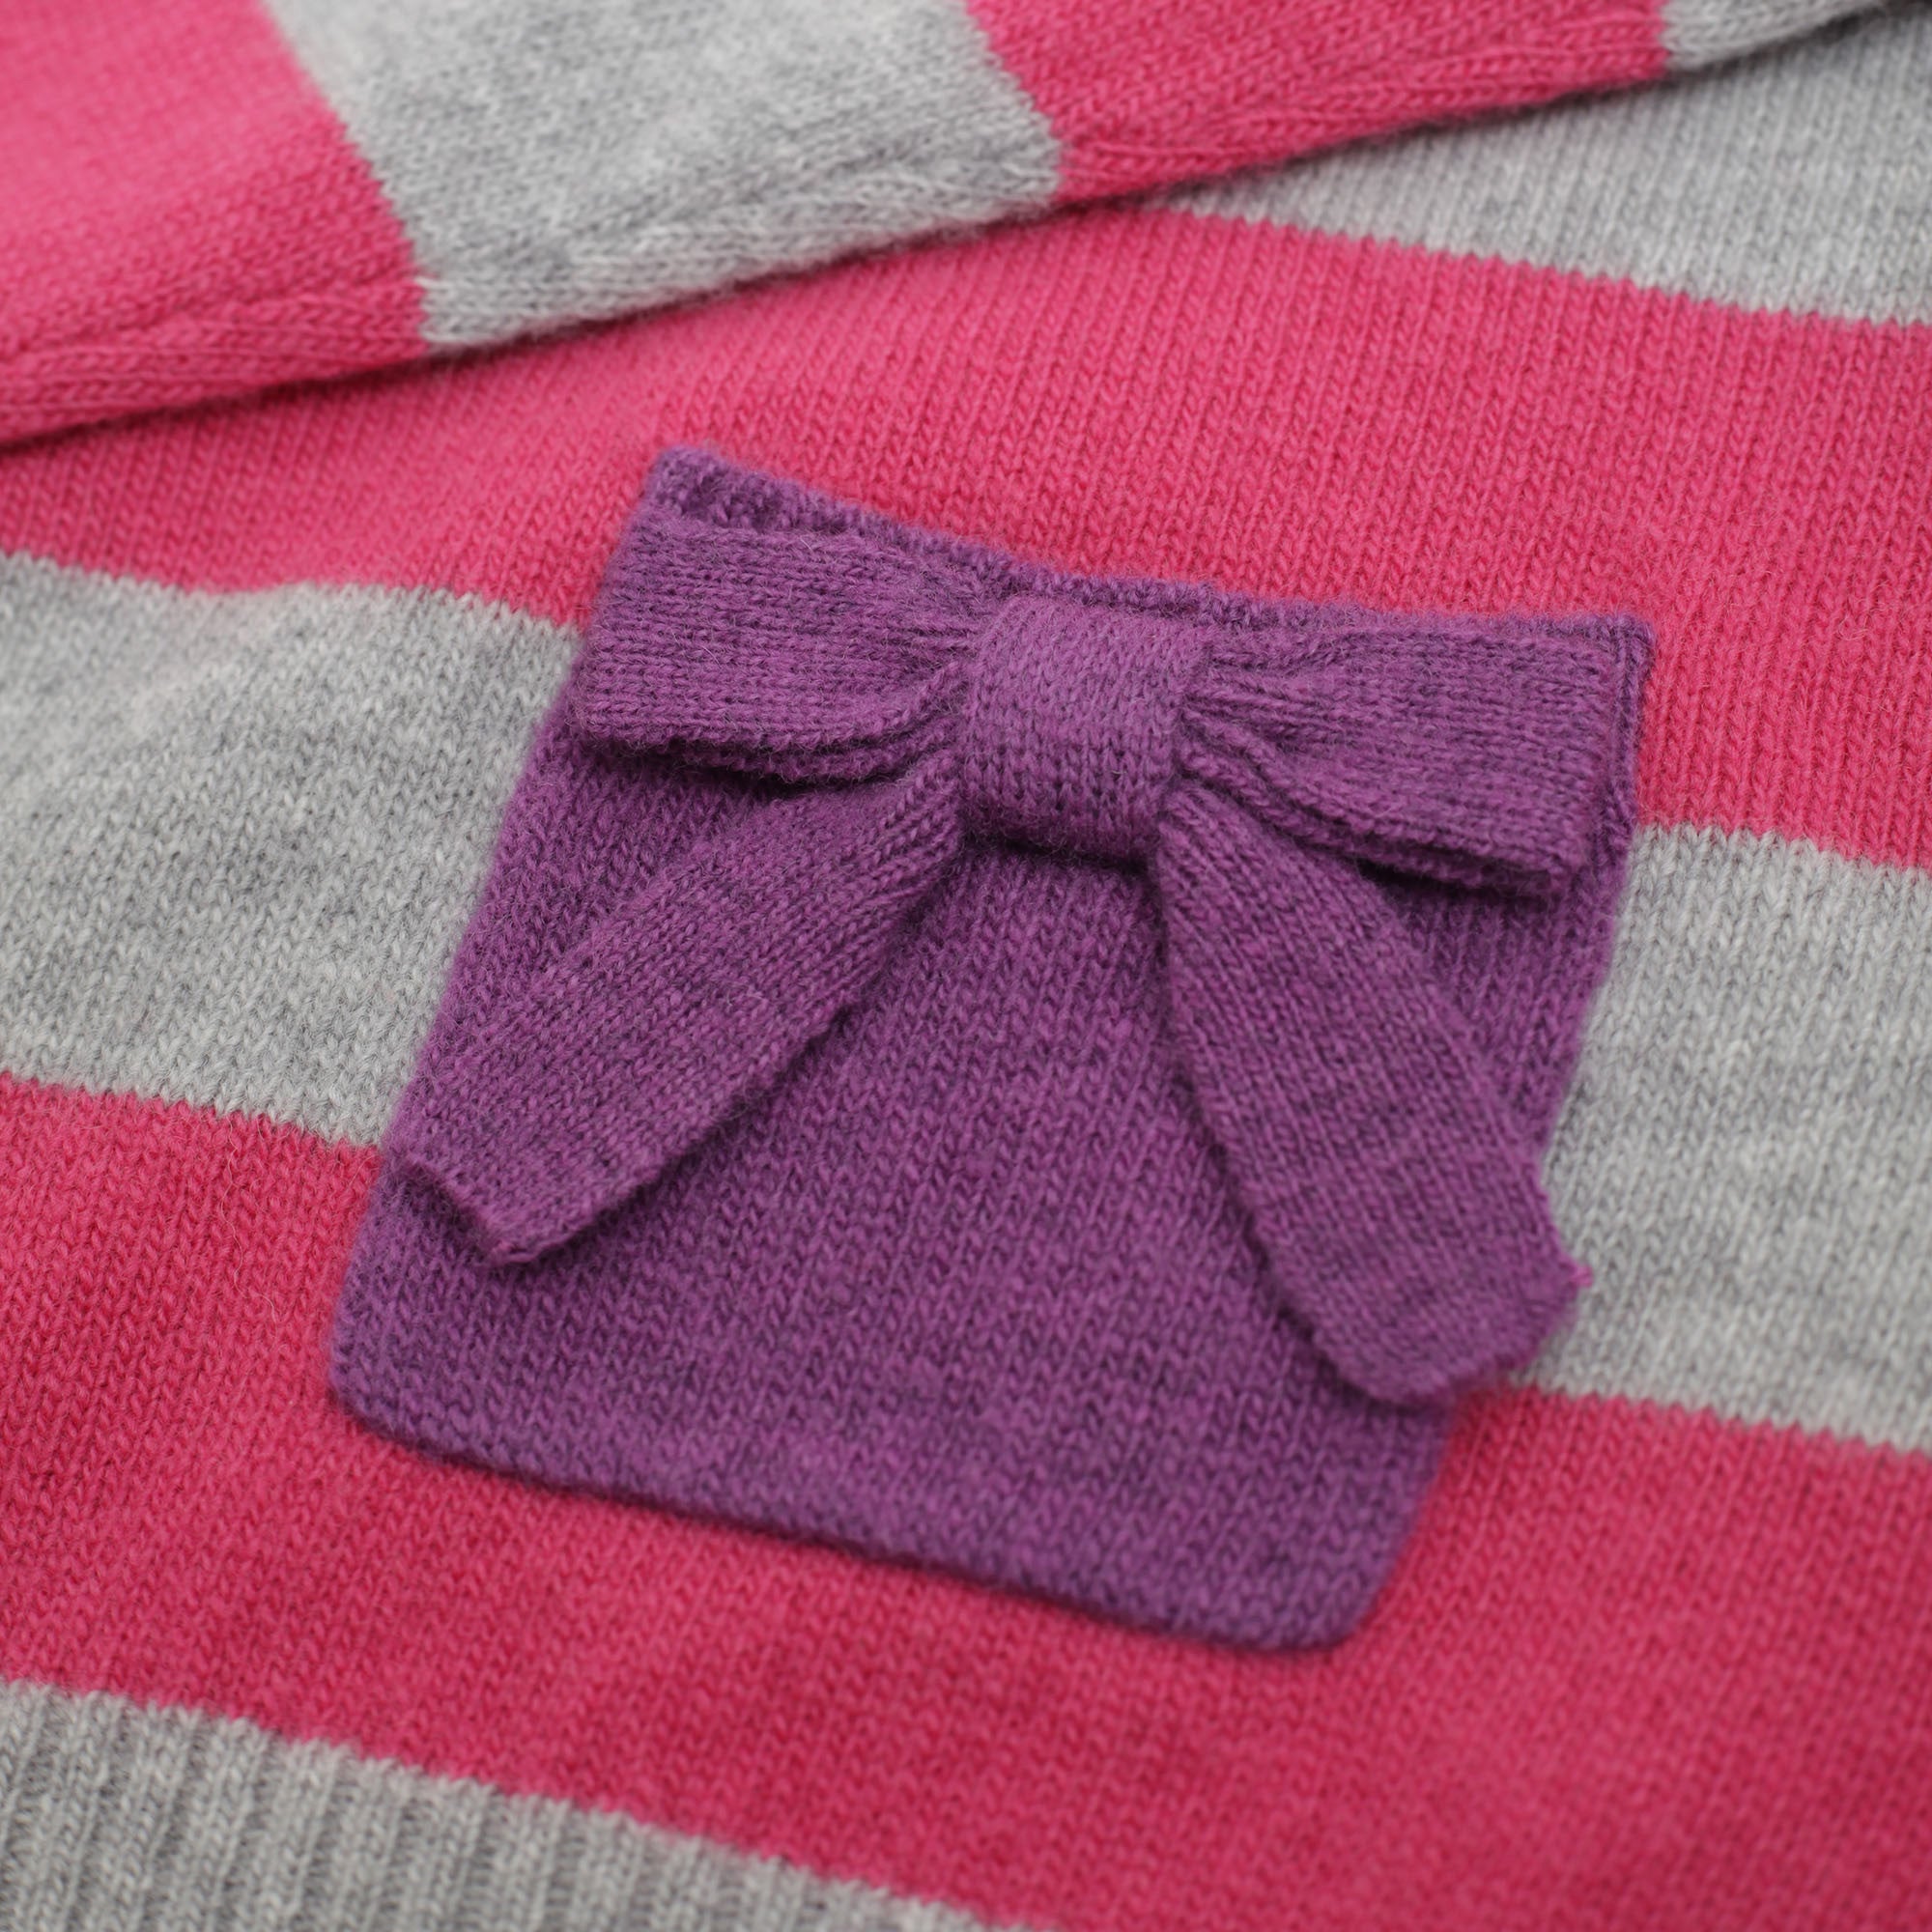 Girls Grey & Pink Striped Wool Sweater With Bow Pocket - CÉMAROSE | Children's Fashion Store - 3